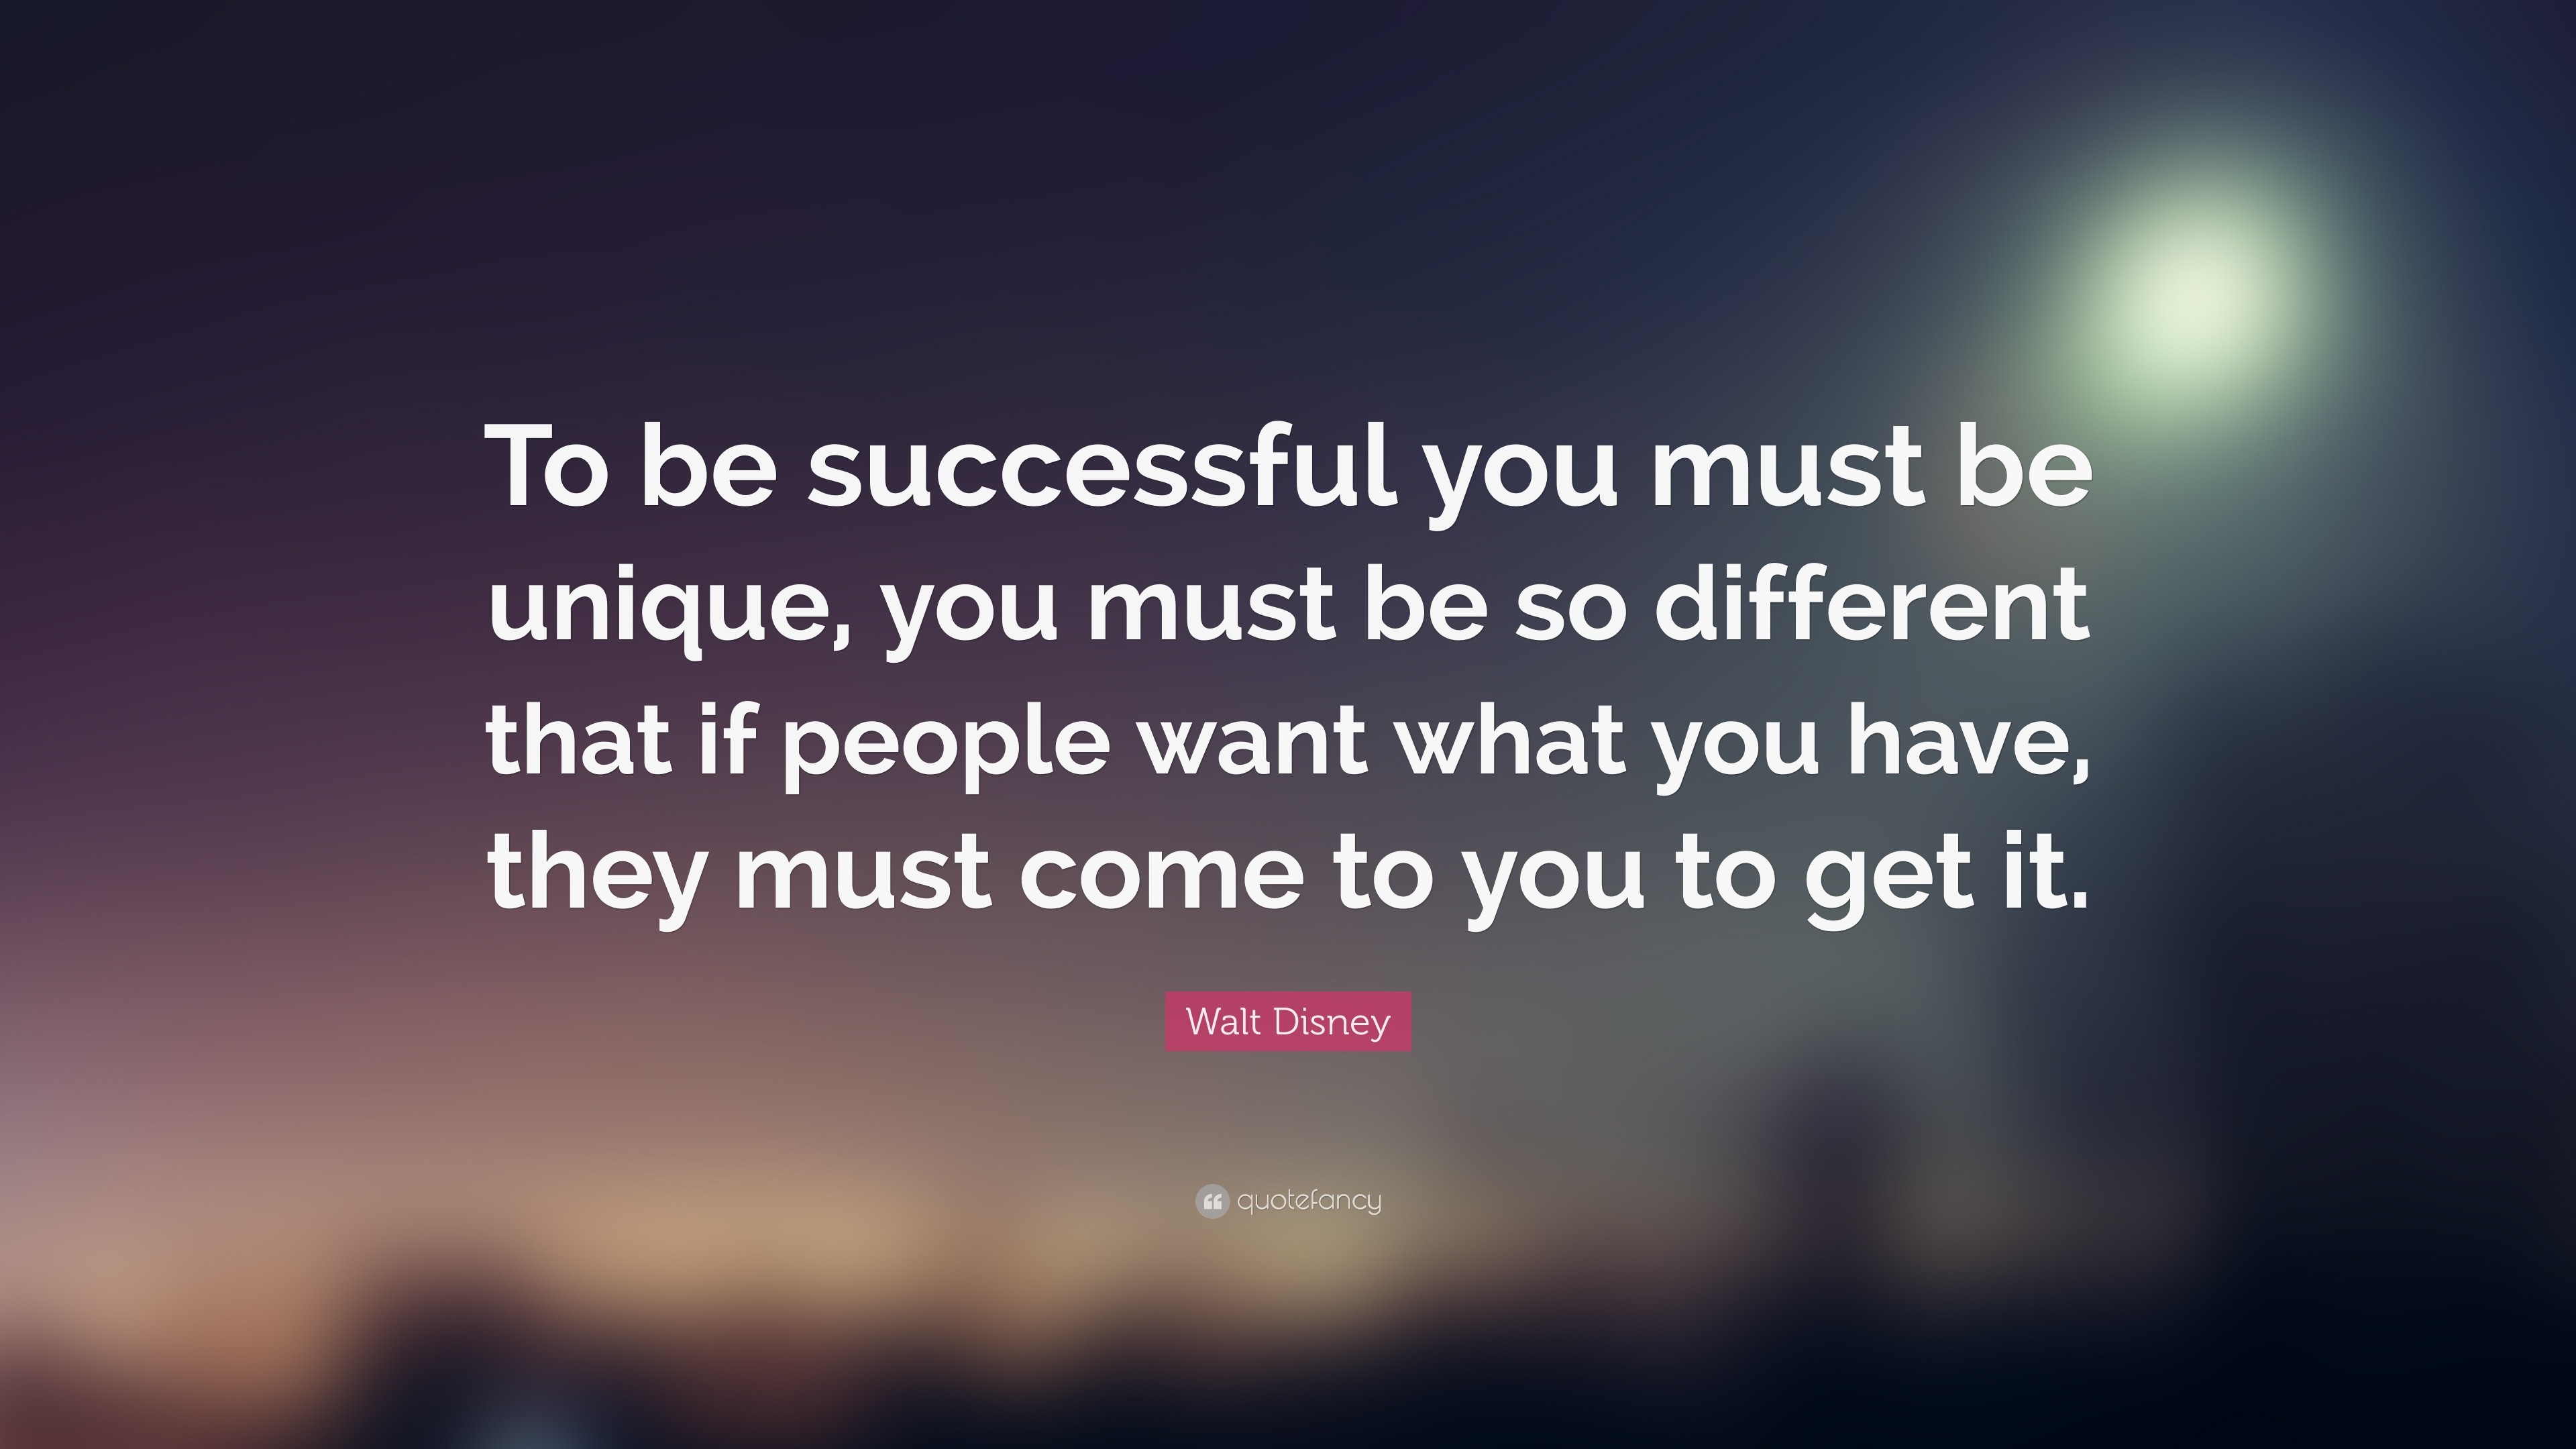 3840x2160 Walt Disney Quote: “To be successful you must be unique, you must be